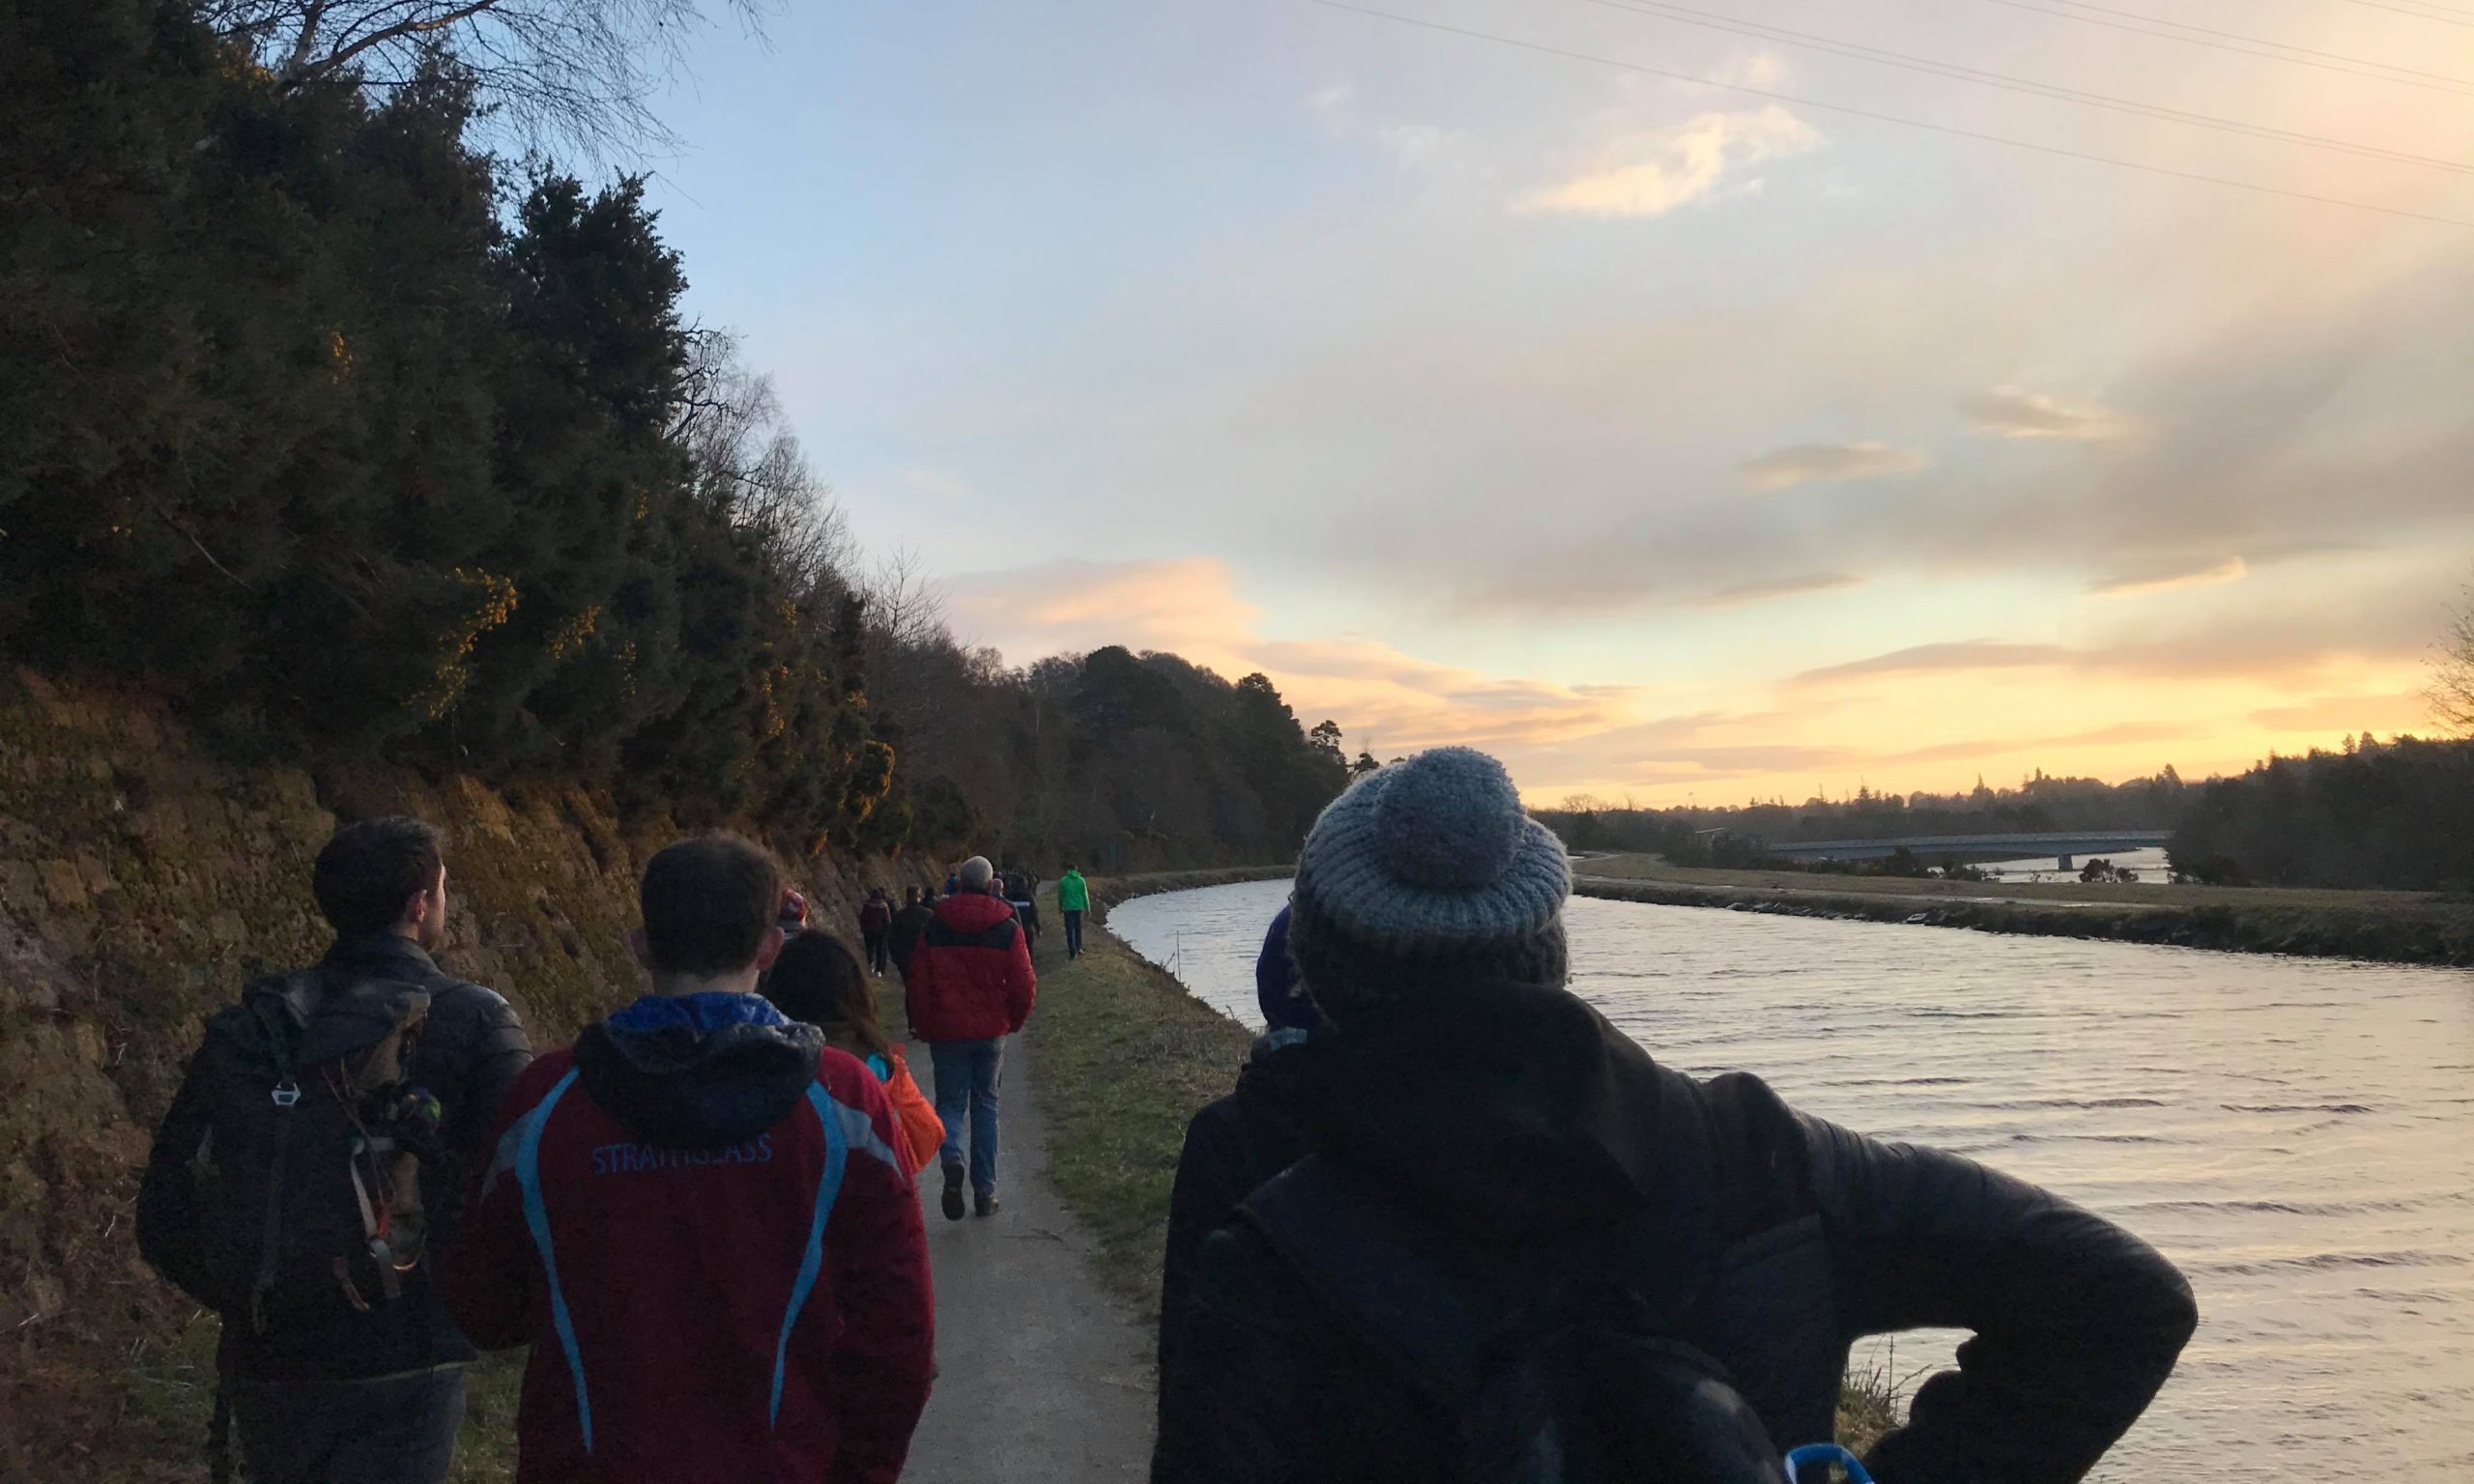 Around 55 gathered to undertake the walk along the Caledonian Canal. Photo by Megan Grant